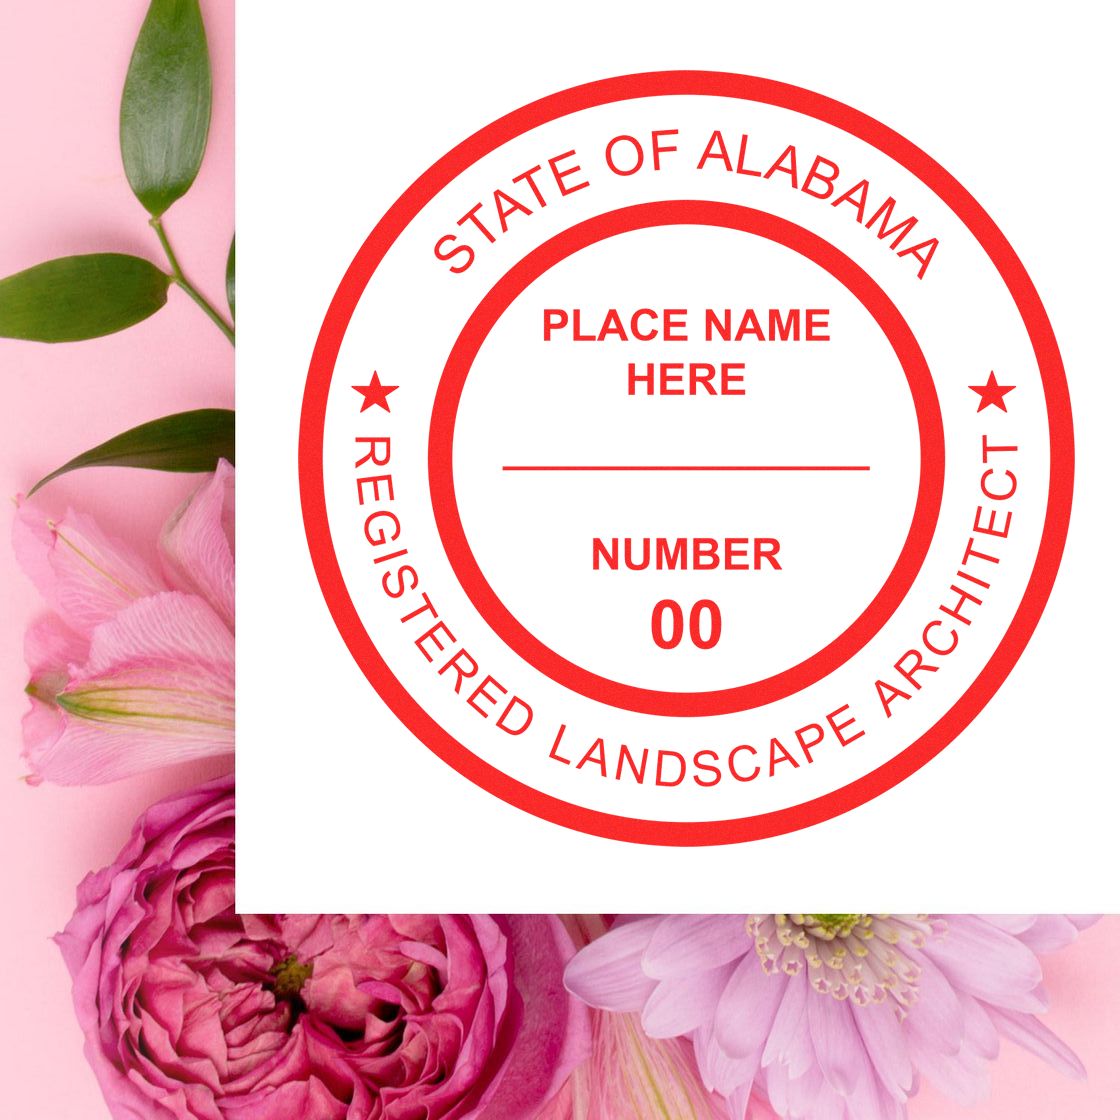 Empowering Alabama Landscape Architects: Understanding Seal Regulations Feature Image